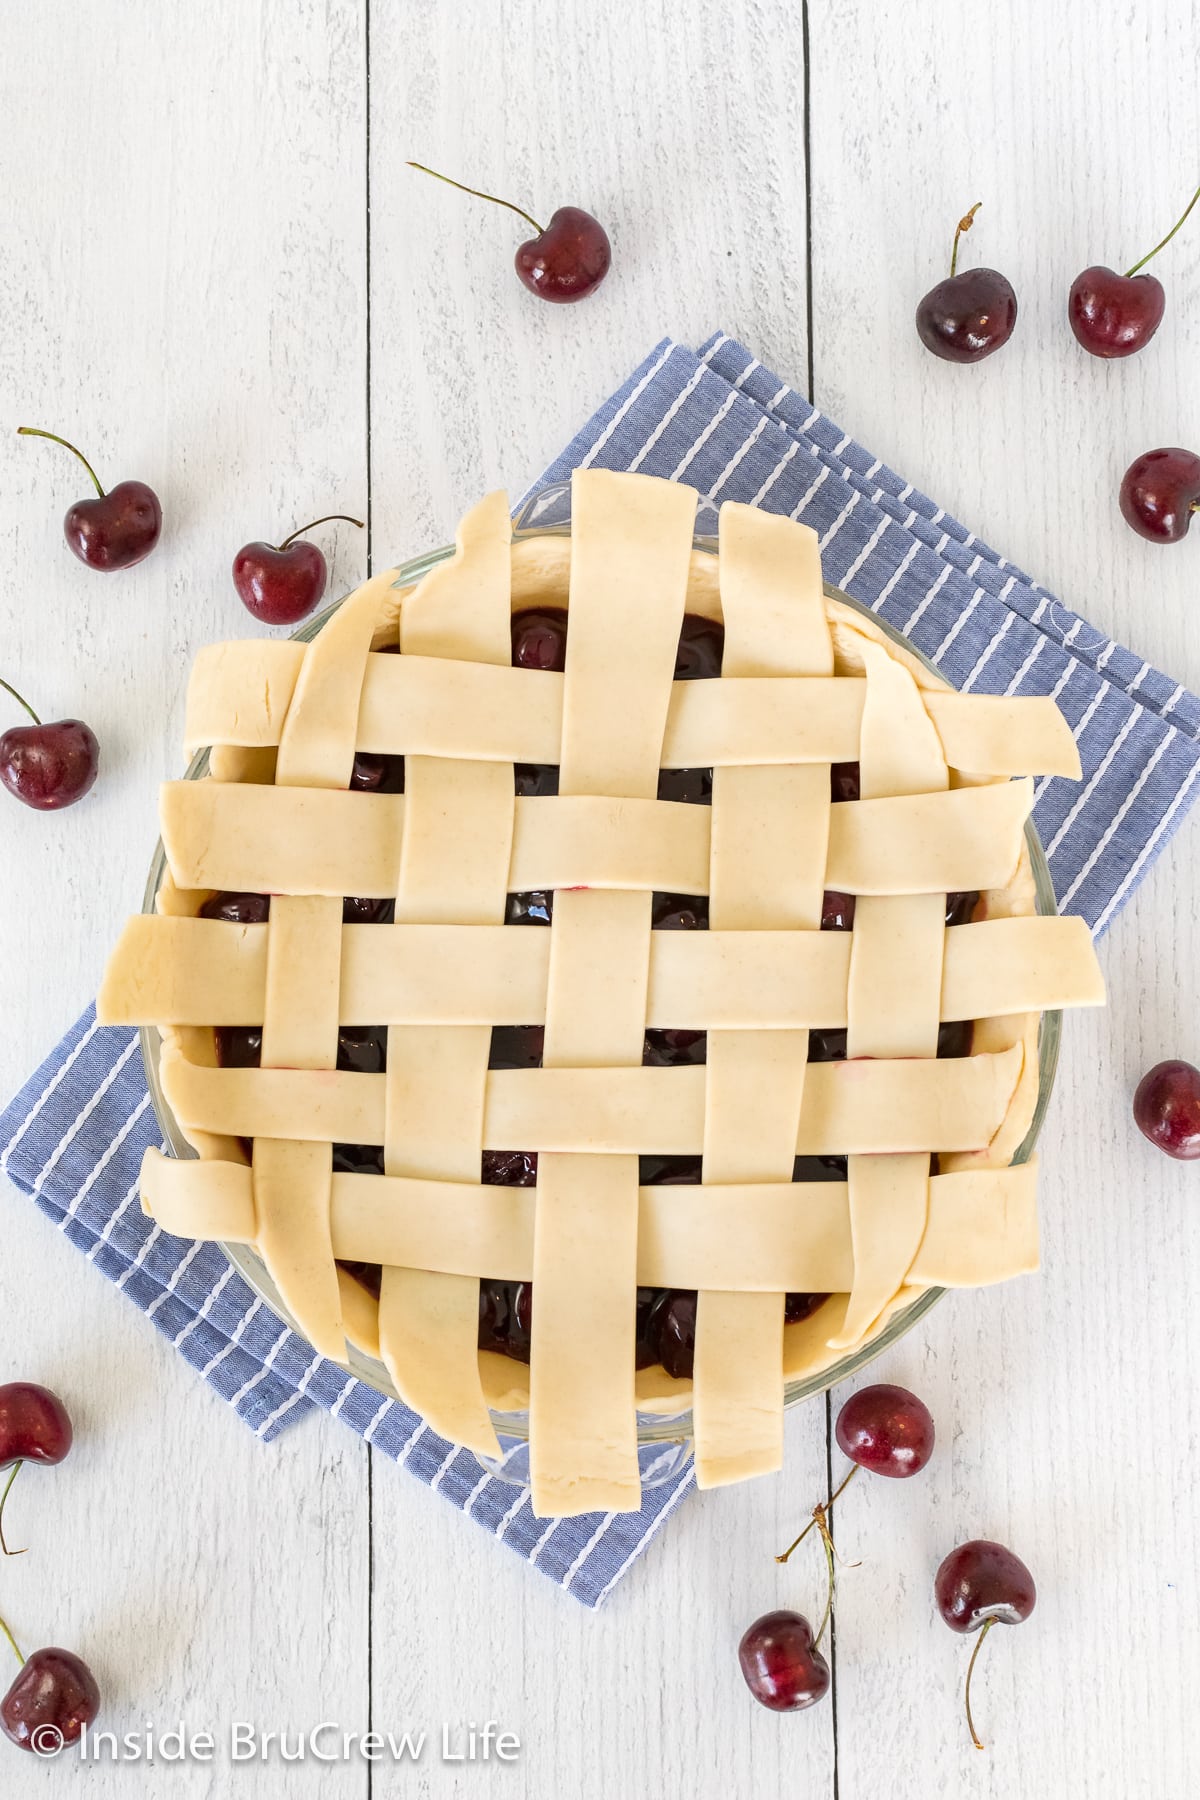 A pie with a lattice top dough covering it.